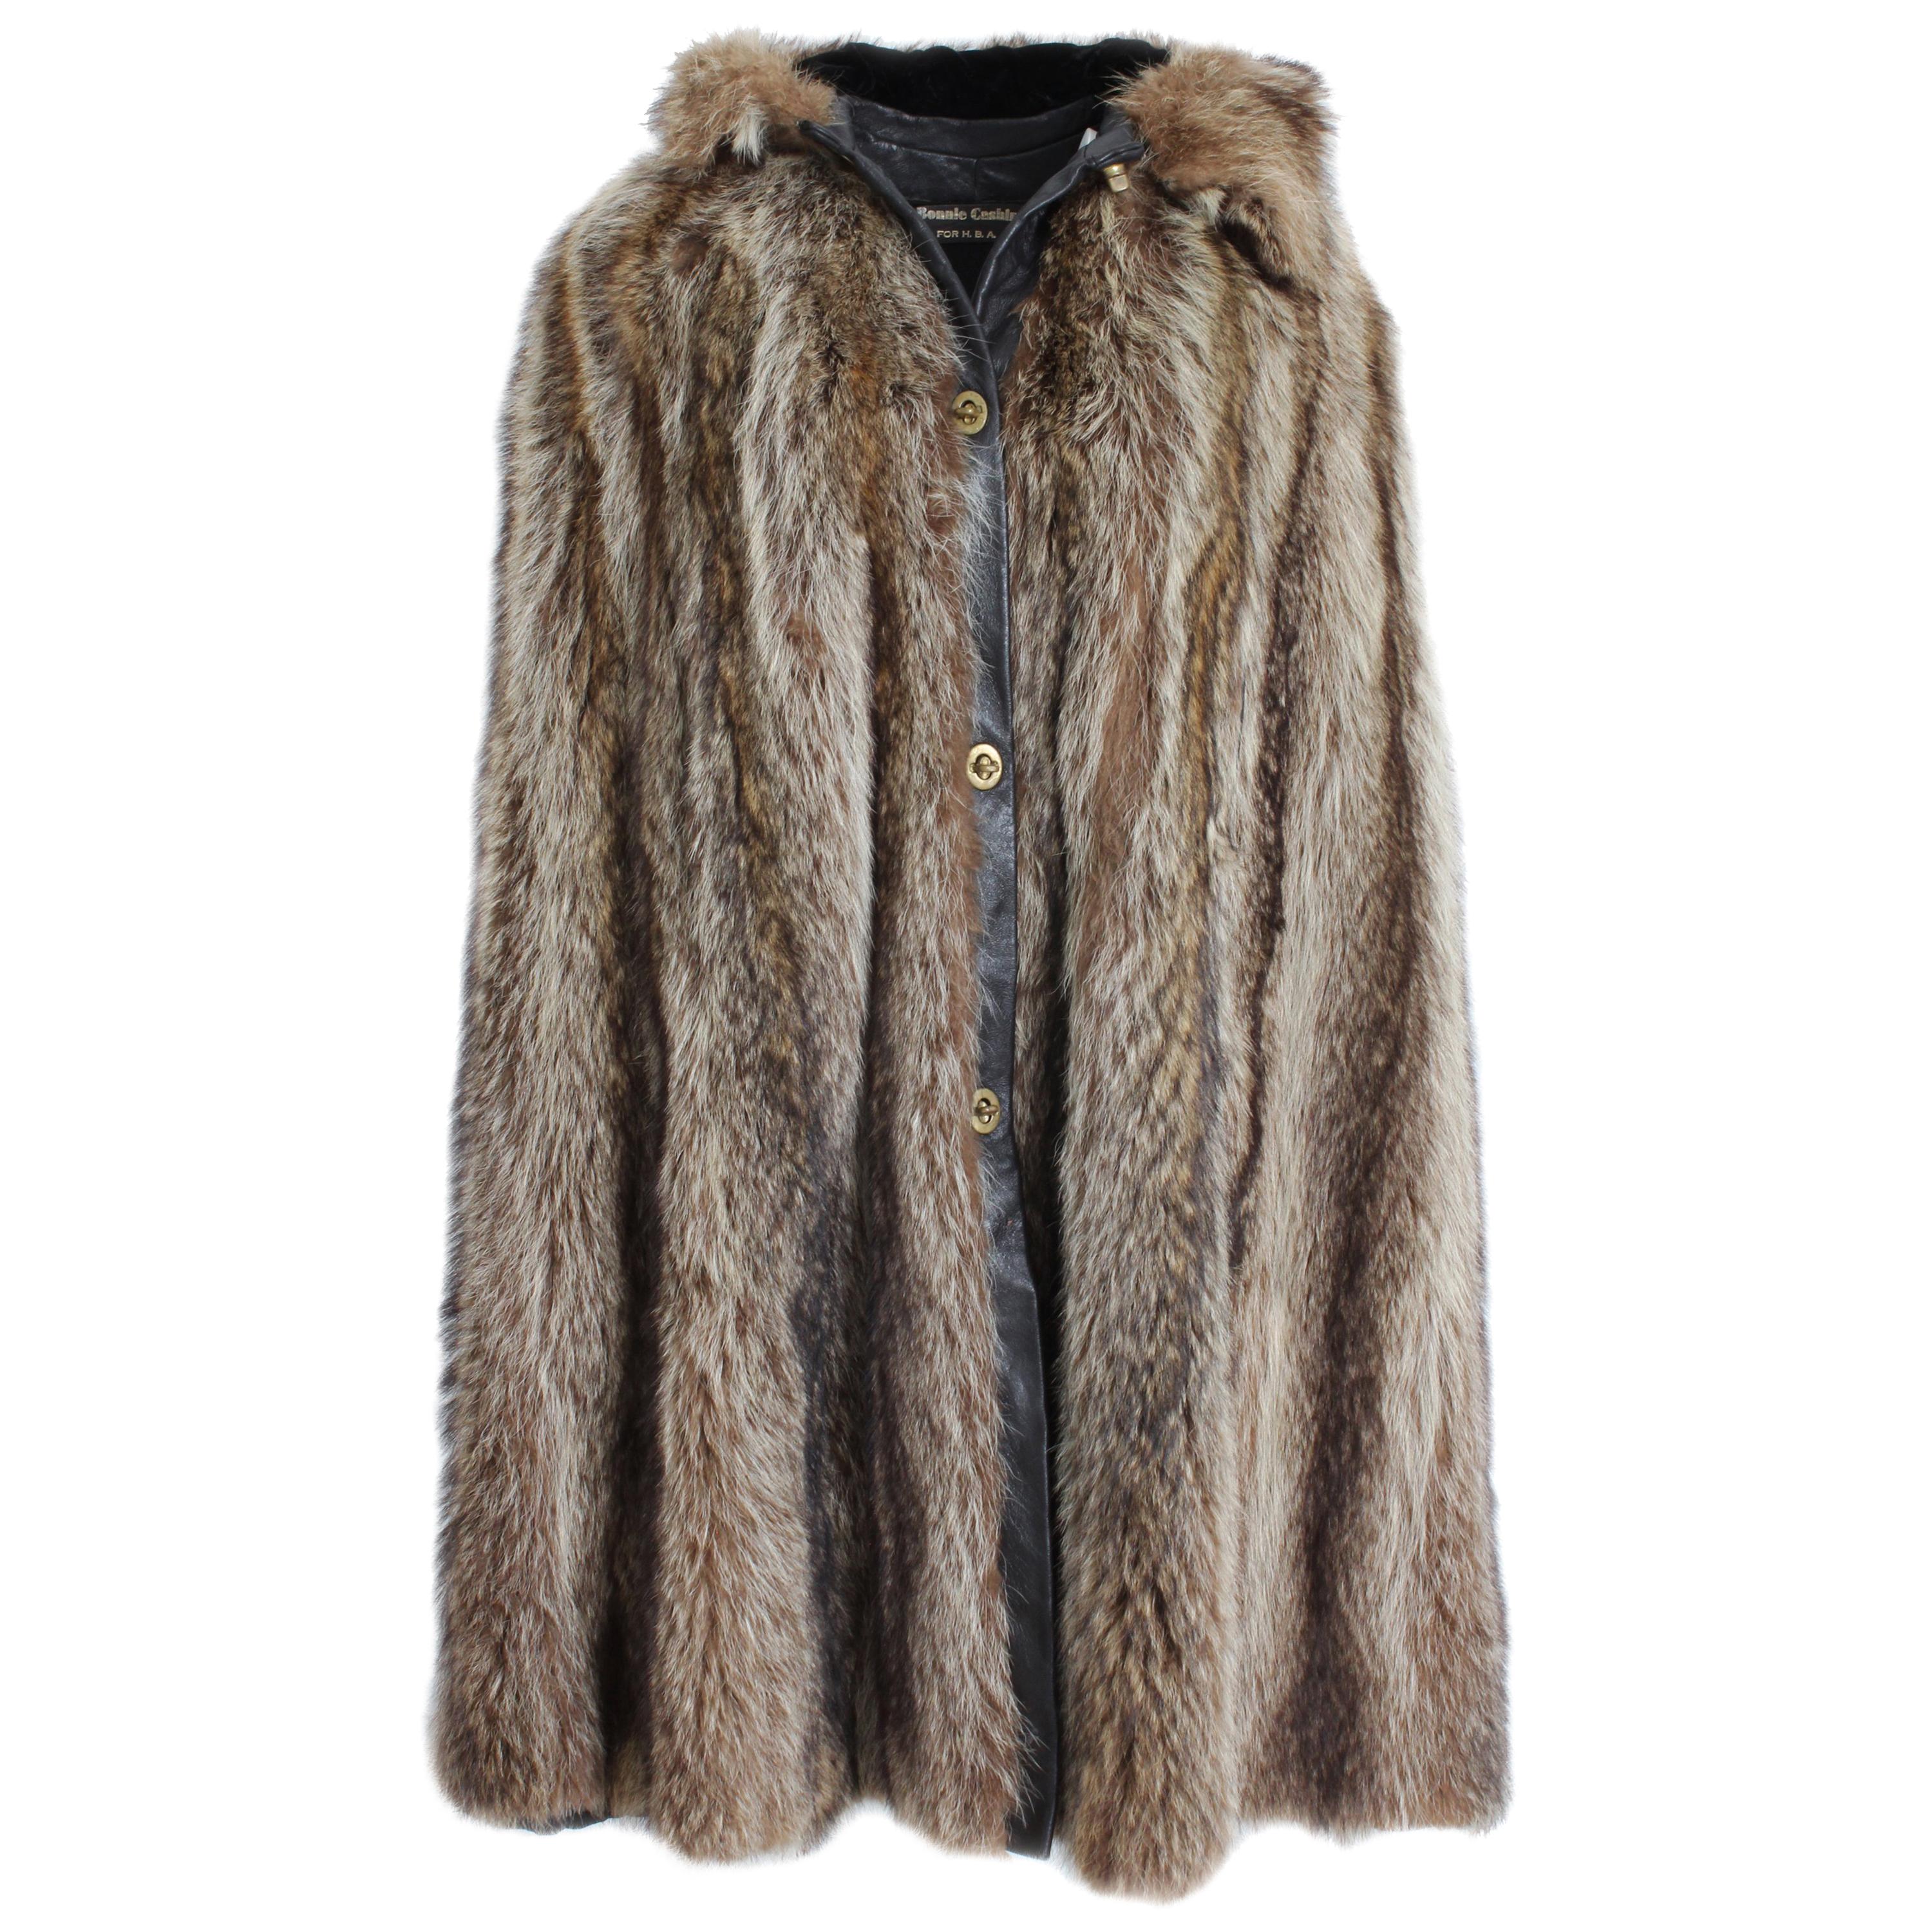 Exquisite Bonnie Cashin for HBA Furs Hooded Raccoon Fur Cape, circa 1974.  Lined in black fabric, it fastens with Bonnie's signature brass turn locks and is trimmed in brown leather.  Arm holes feature hidden interior pockets.  

An iconic hooded